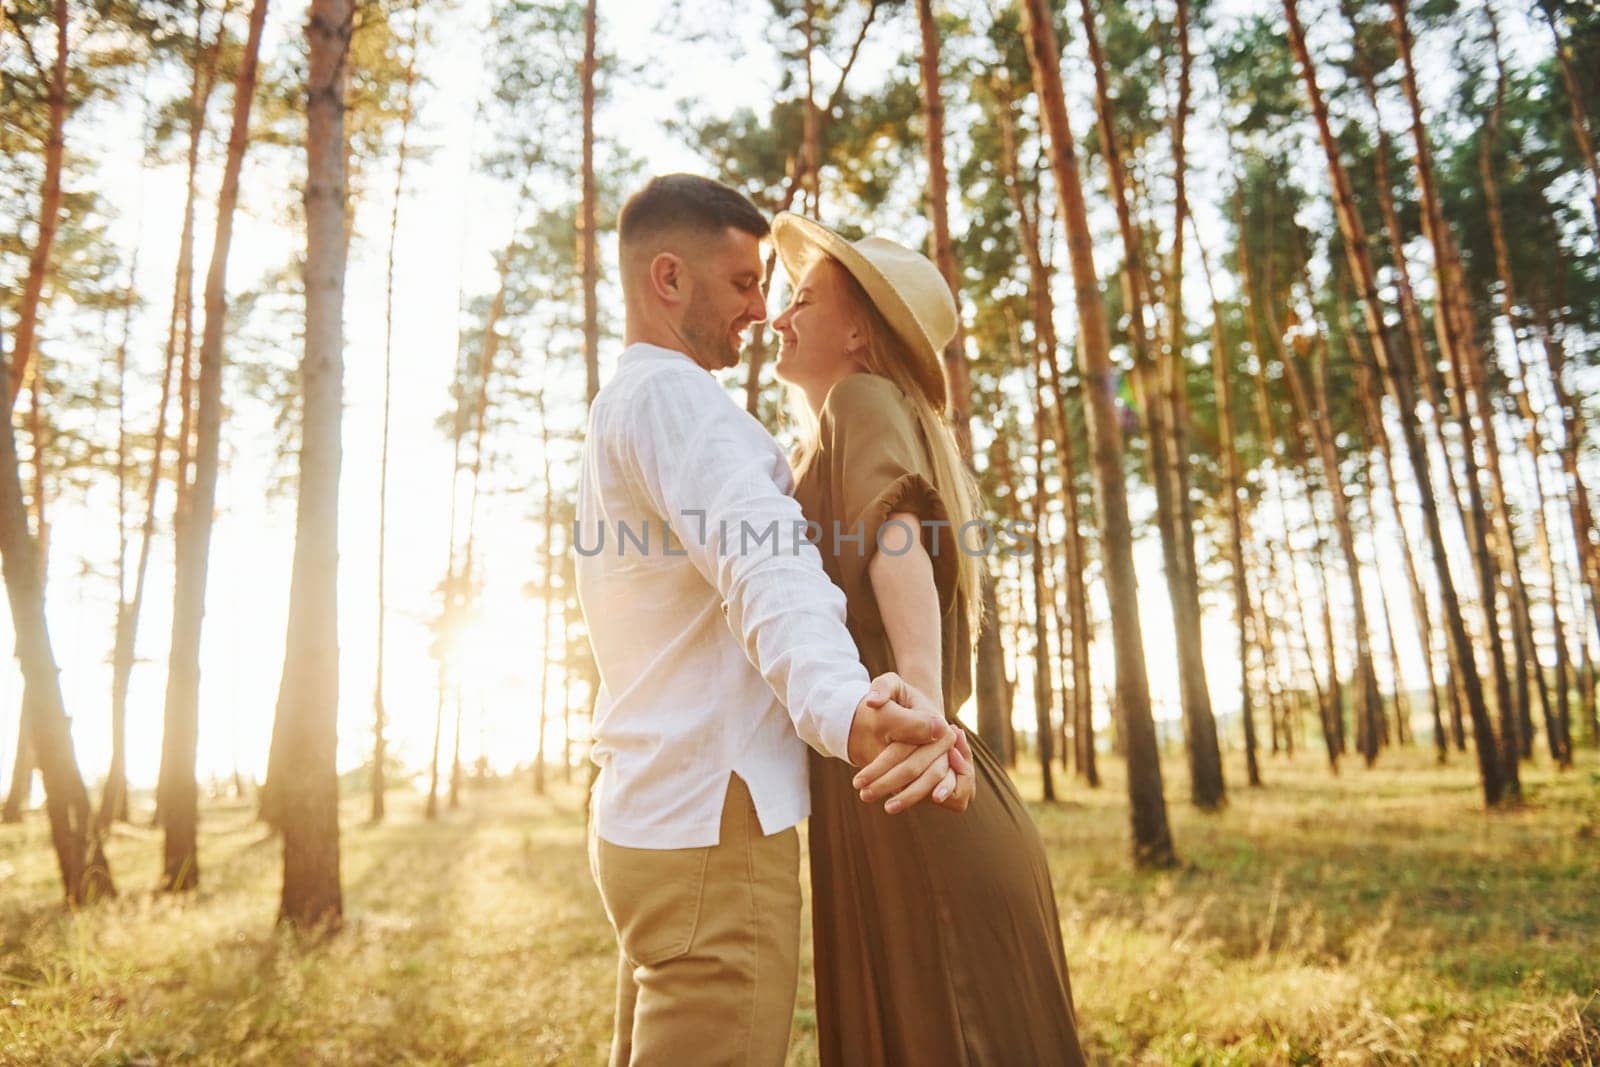 Warm weather. Happy couple is outdoors in the forest at daytime.